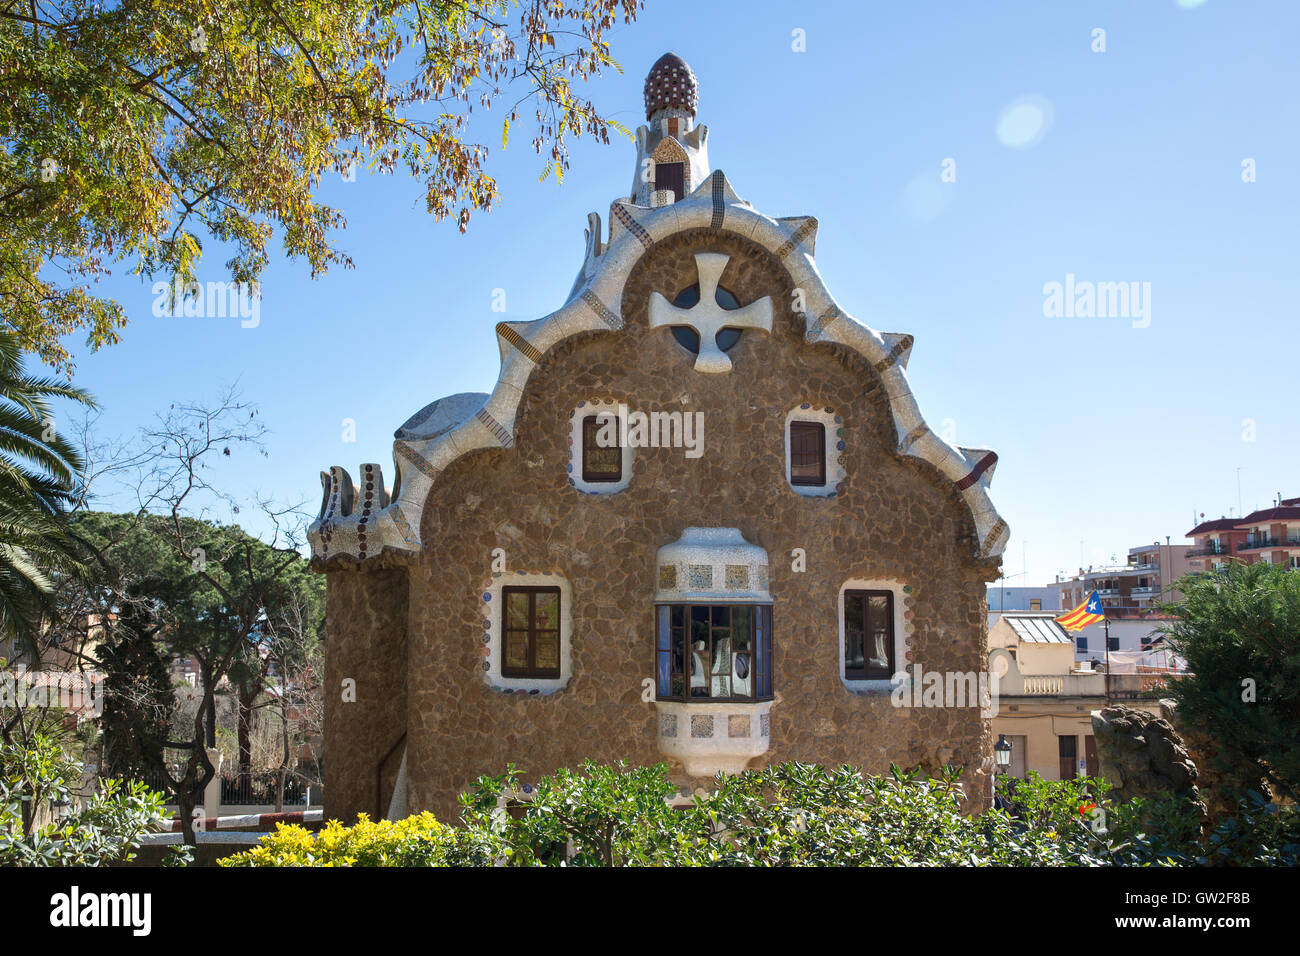 The Park Guell (Gaudi Park) in Barcelona, Spain. Stock Photo